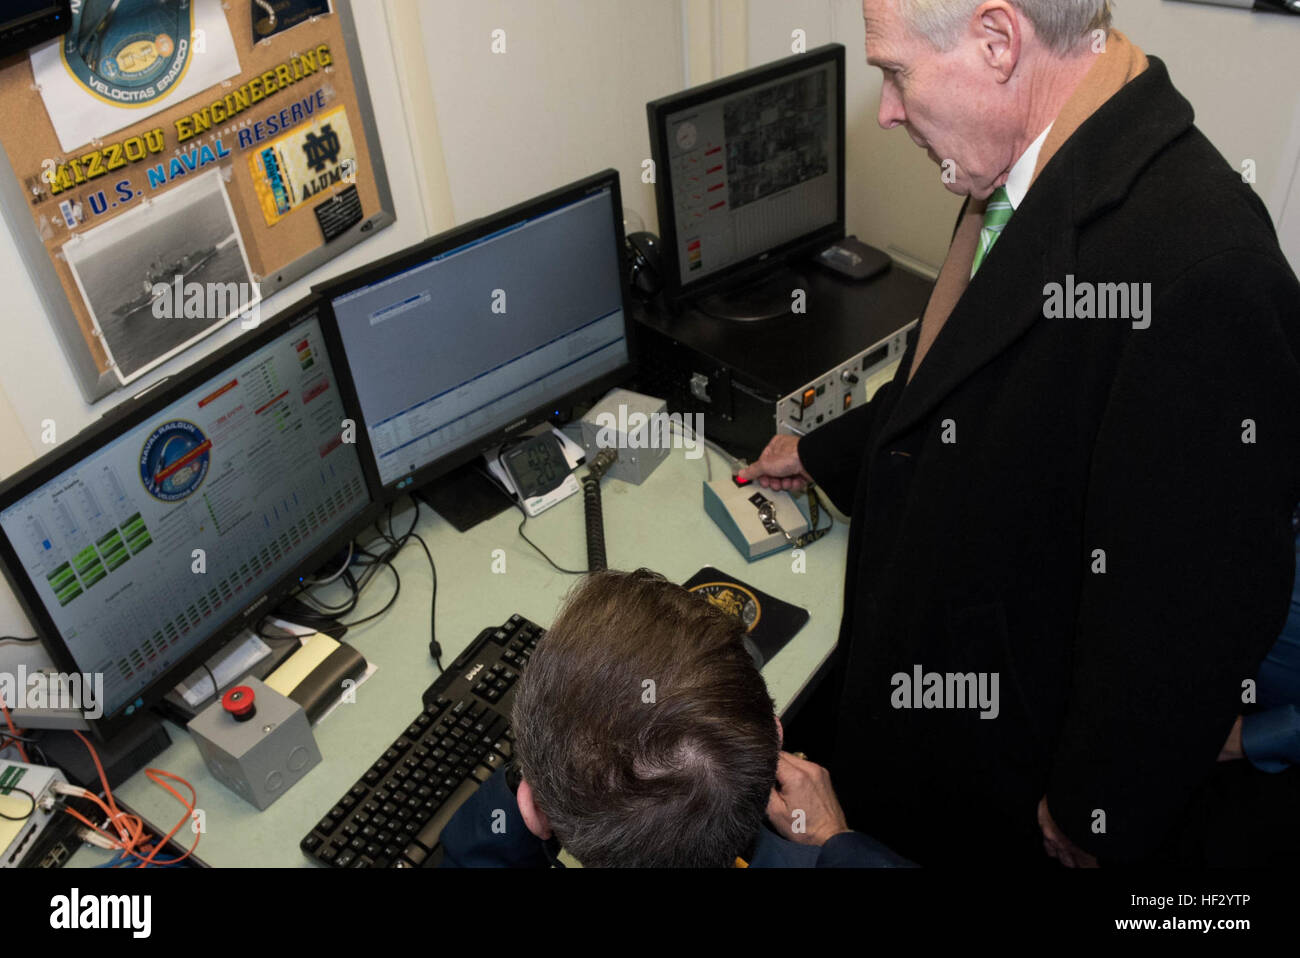 150220-N-LV331-002 - WASHINGTON (Feb. 20, 2015) Secretary of the Navy (SECNAV) Ray Mabus presses a button to fire a round out of a railgun from a control room at the Naval Research Laboratory. During his visit, Mabus spoke with project experts and observed ongoing innovations to electronic warfare systems, anti-submarine warfare projects and autonomous systems. (U.S. Navy photo by Mass Communication Specialist 2nd Class Armando Gonzales/Released) Naval Research Laboratory 150220-N-LV331-002 Stock Photo